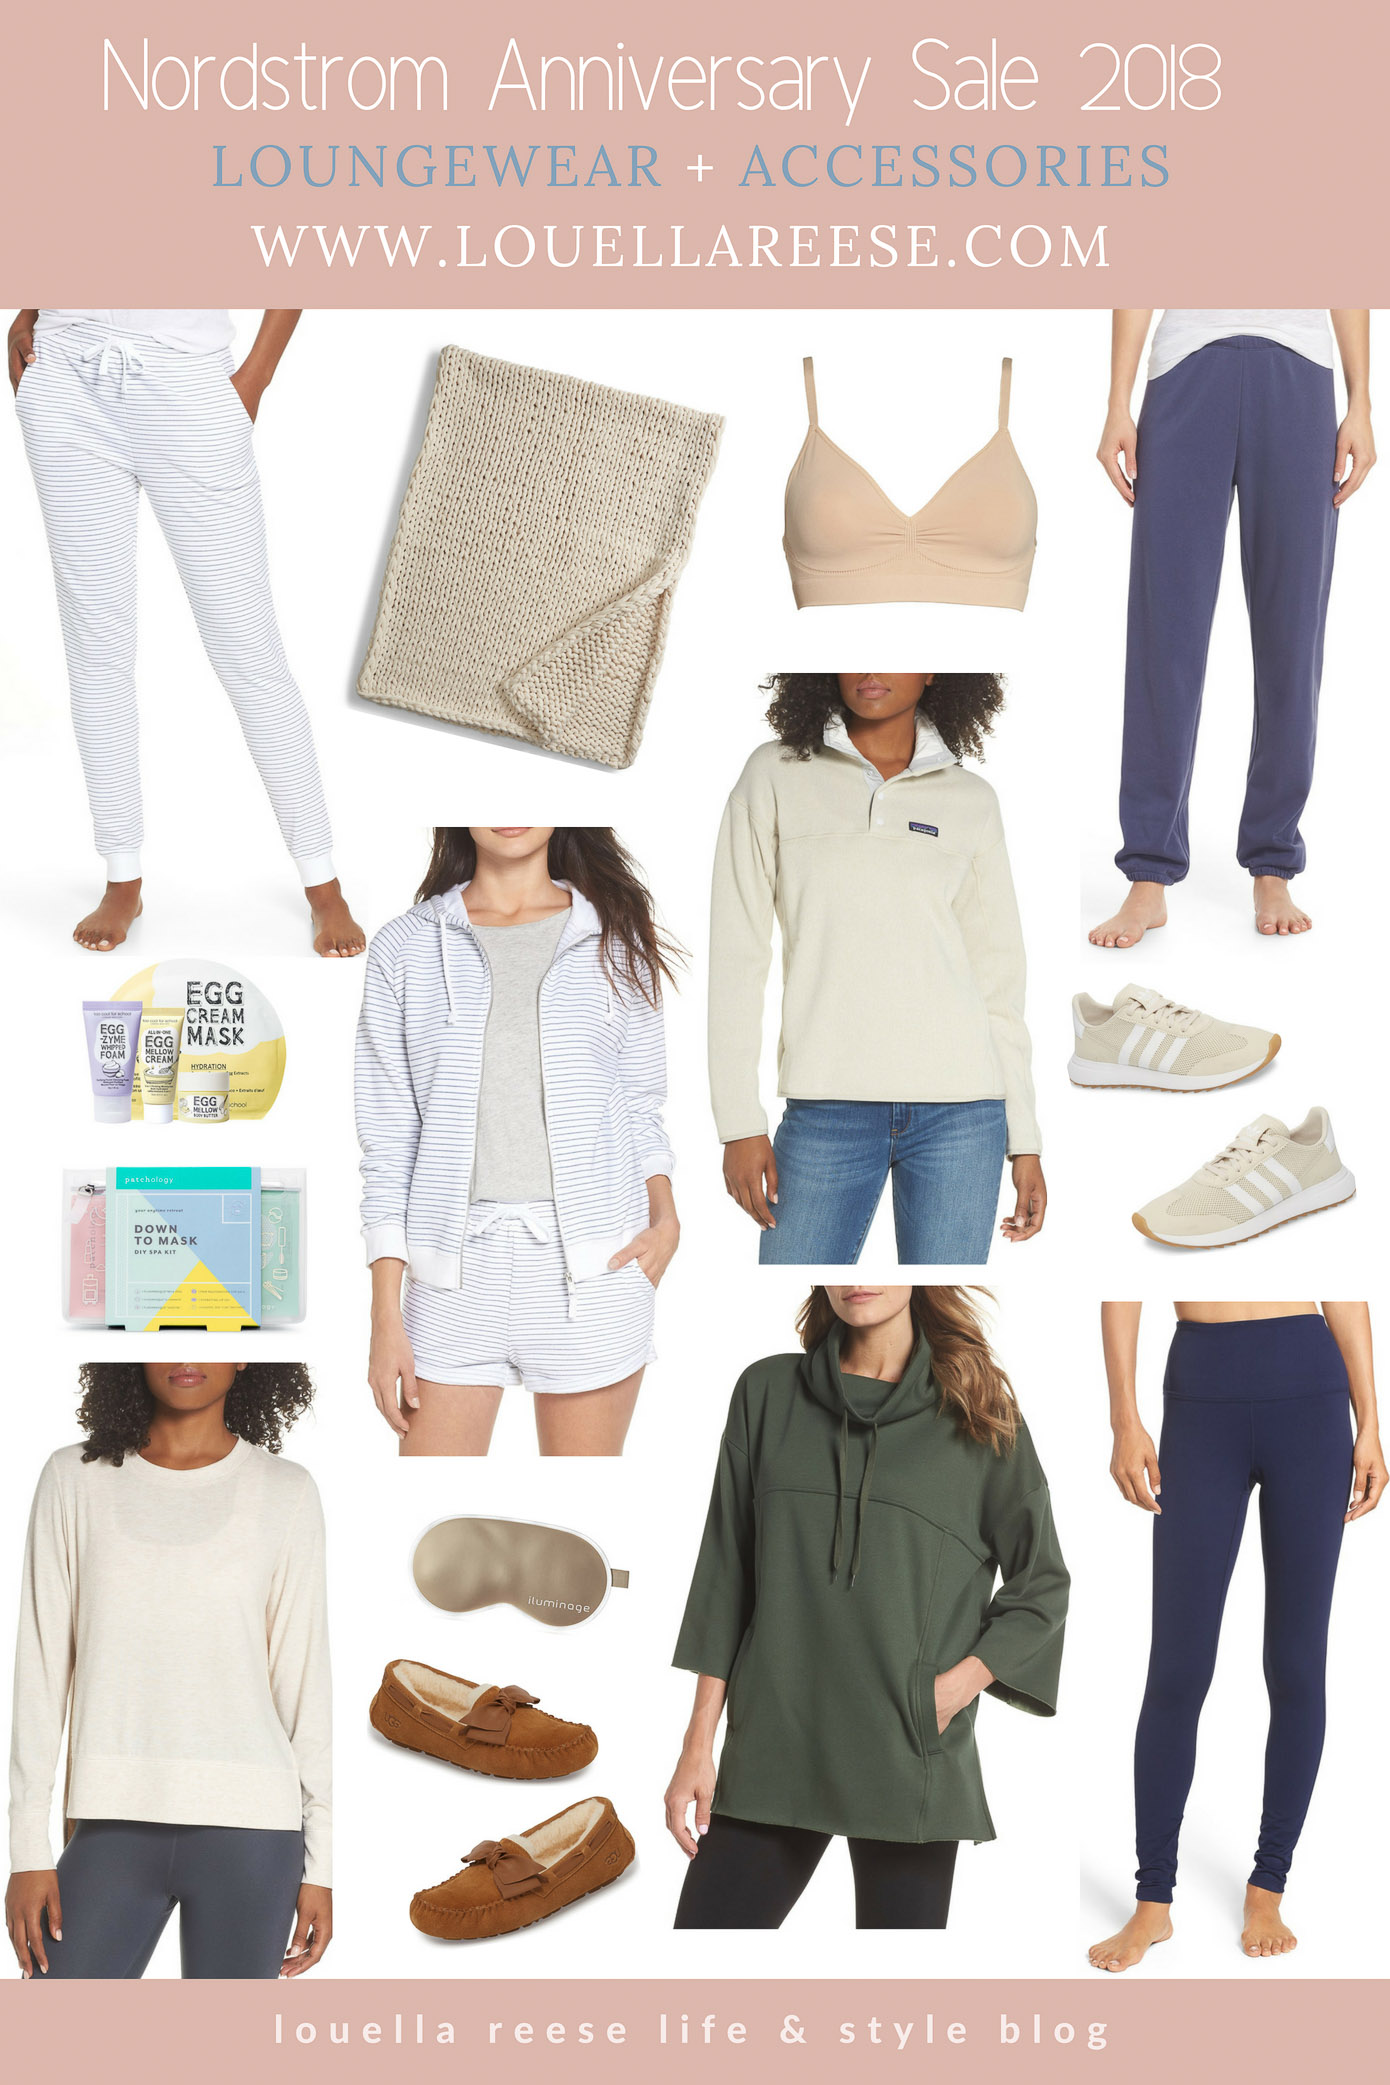 2018 Nordstrom Anniversary Sale Loungewear featured on Louella Reese Life & Style Blog 